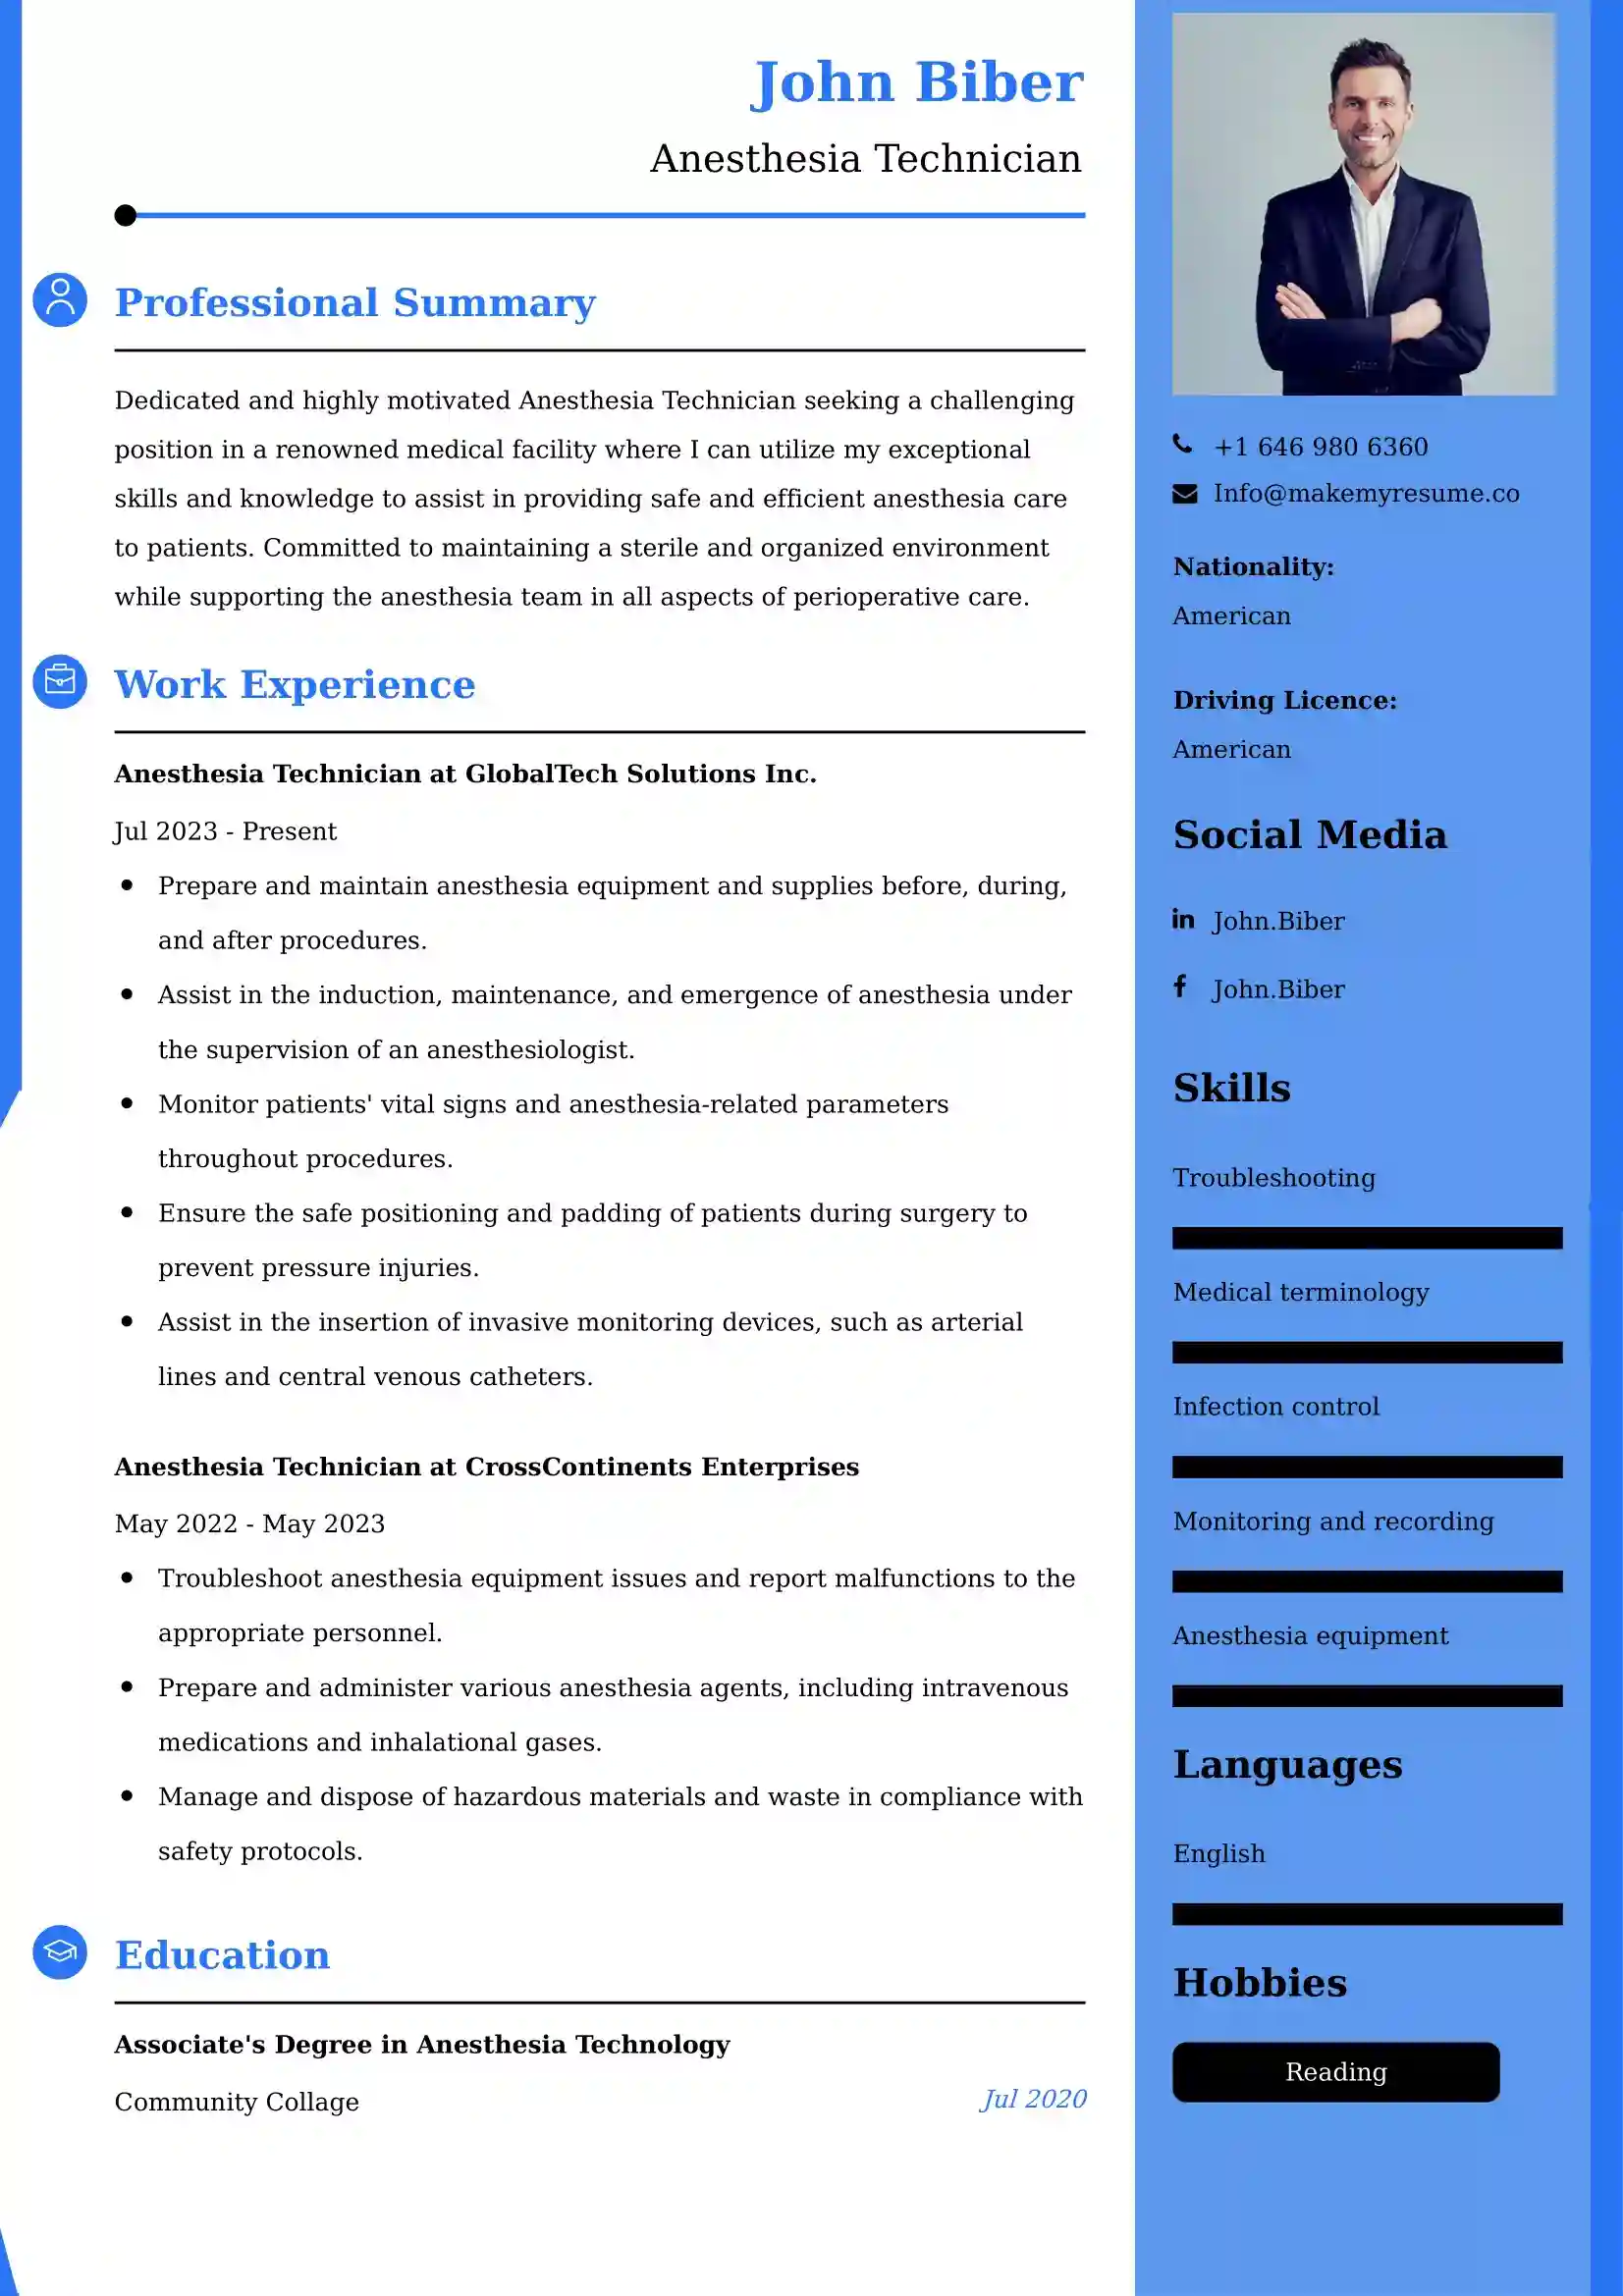 Anesthesia Technician Resume Examples for UK Jobs - Tips and Guide